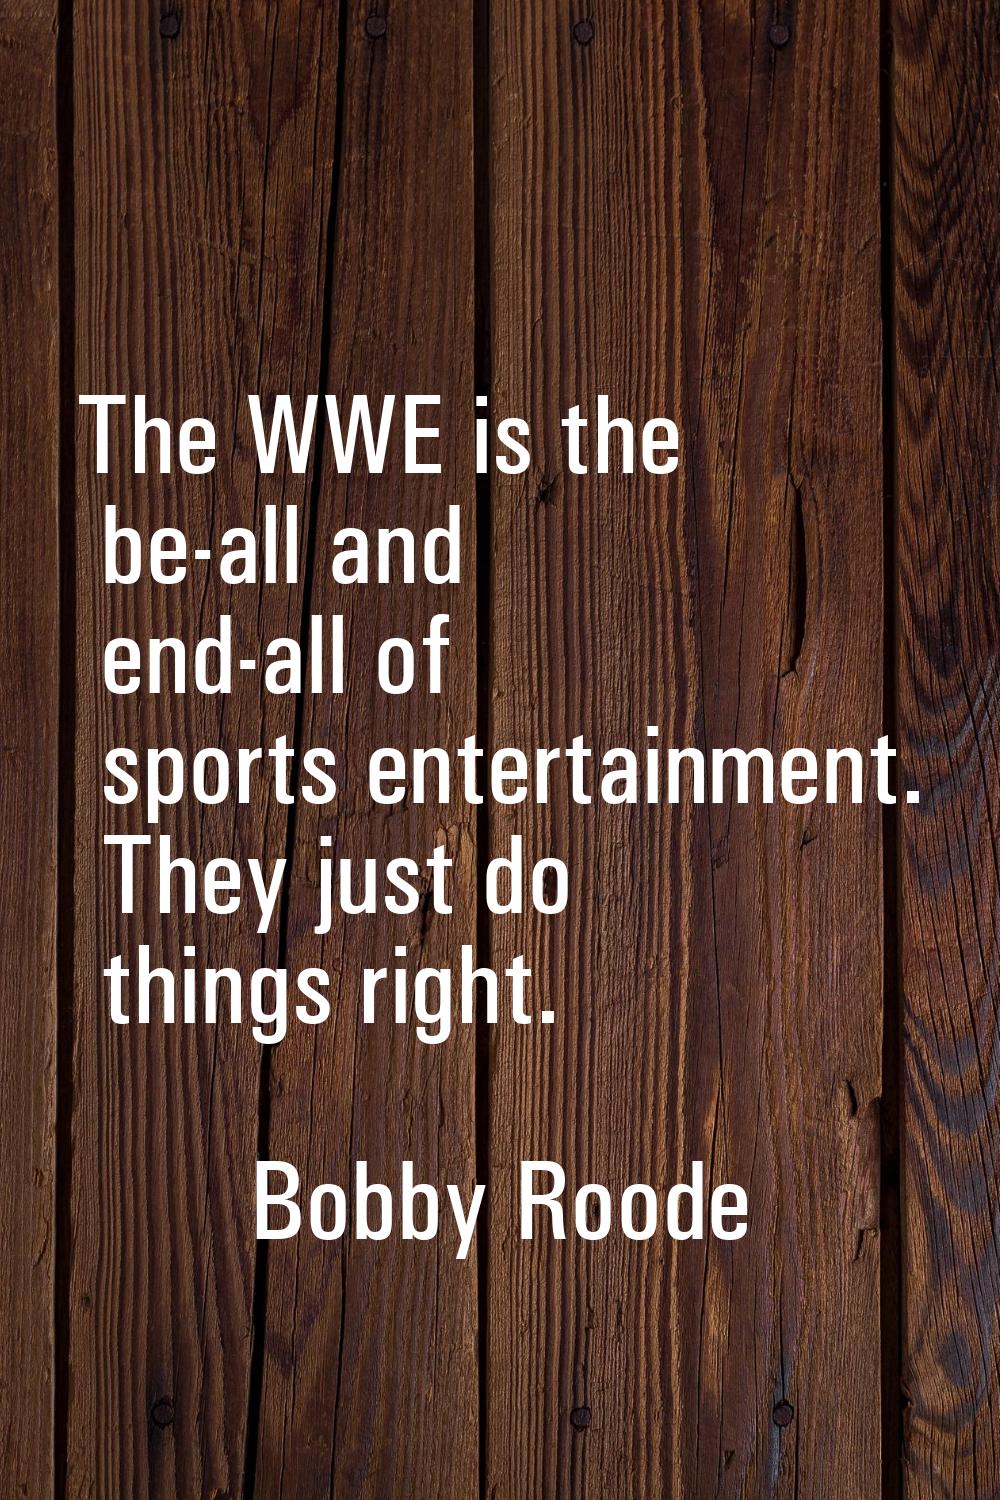 The WWE is the be-all and end-all of sports entertainment. They just do things right.